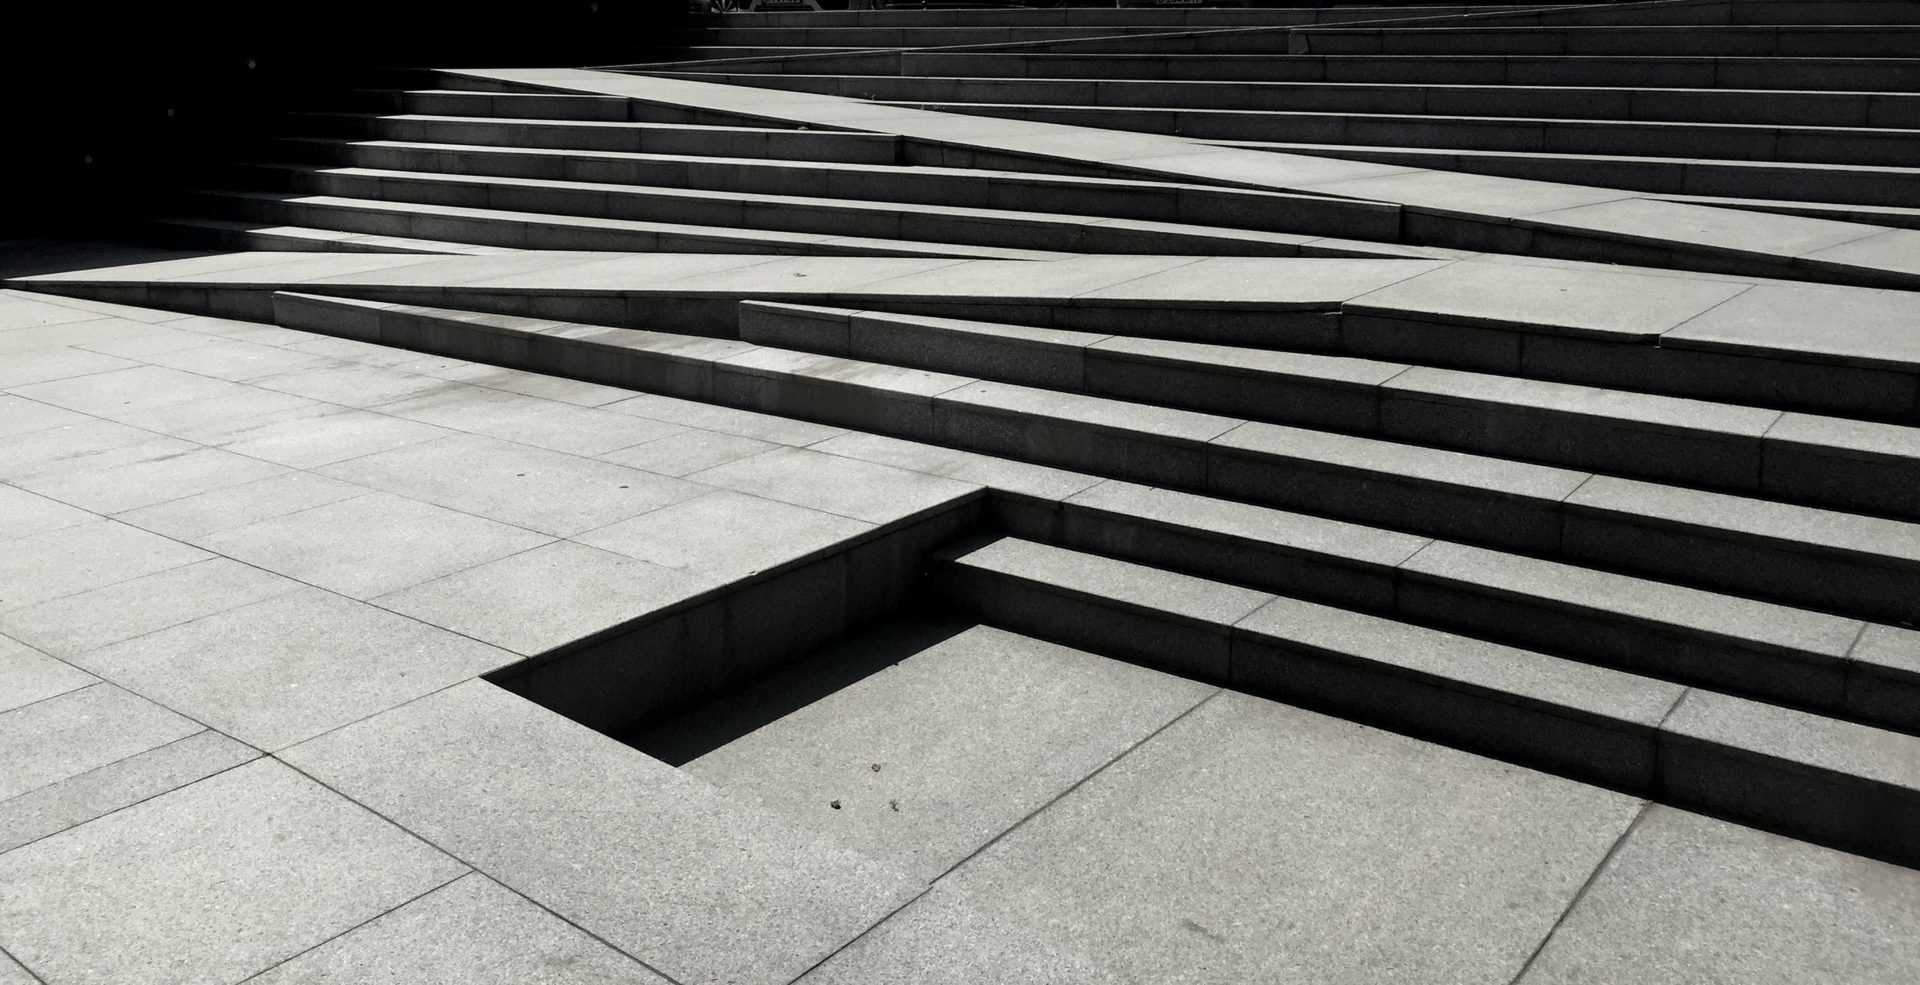 This stair design has targeted accessibility by incorporating a ramp within the steps.